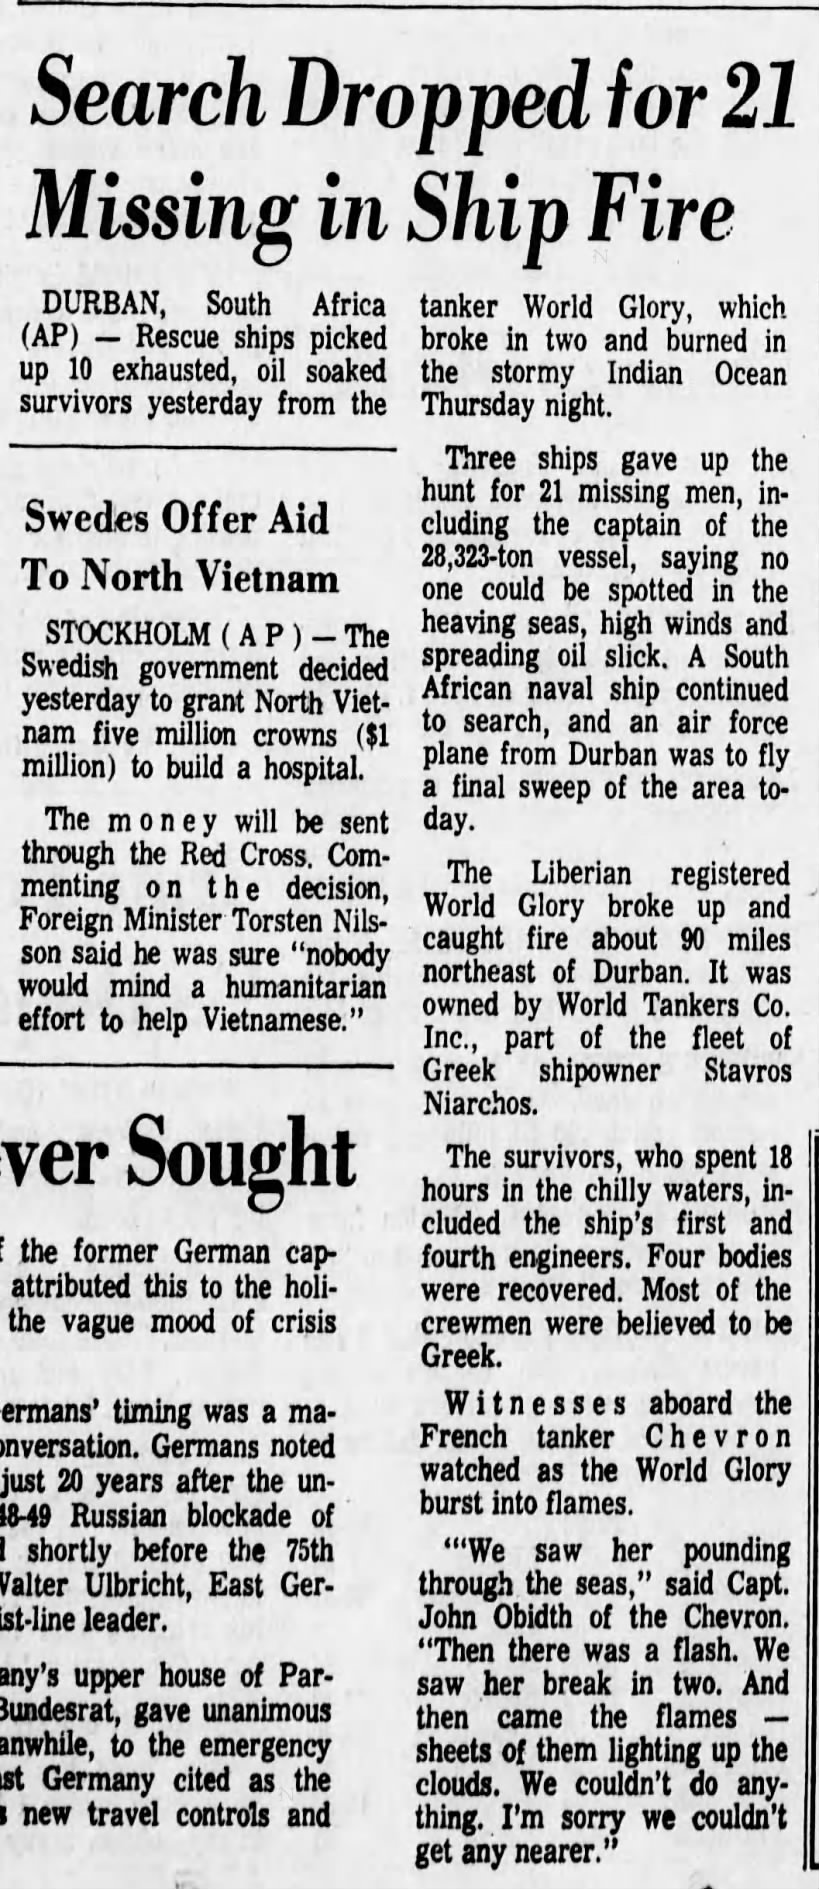 Search Dropped for 21 Missing in Ship Fire (World Glory, 1968)